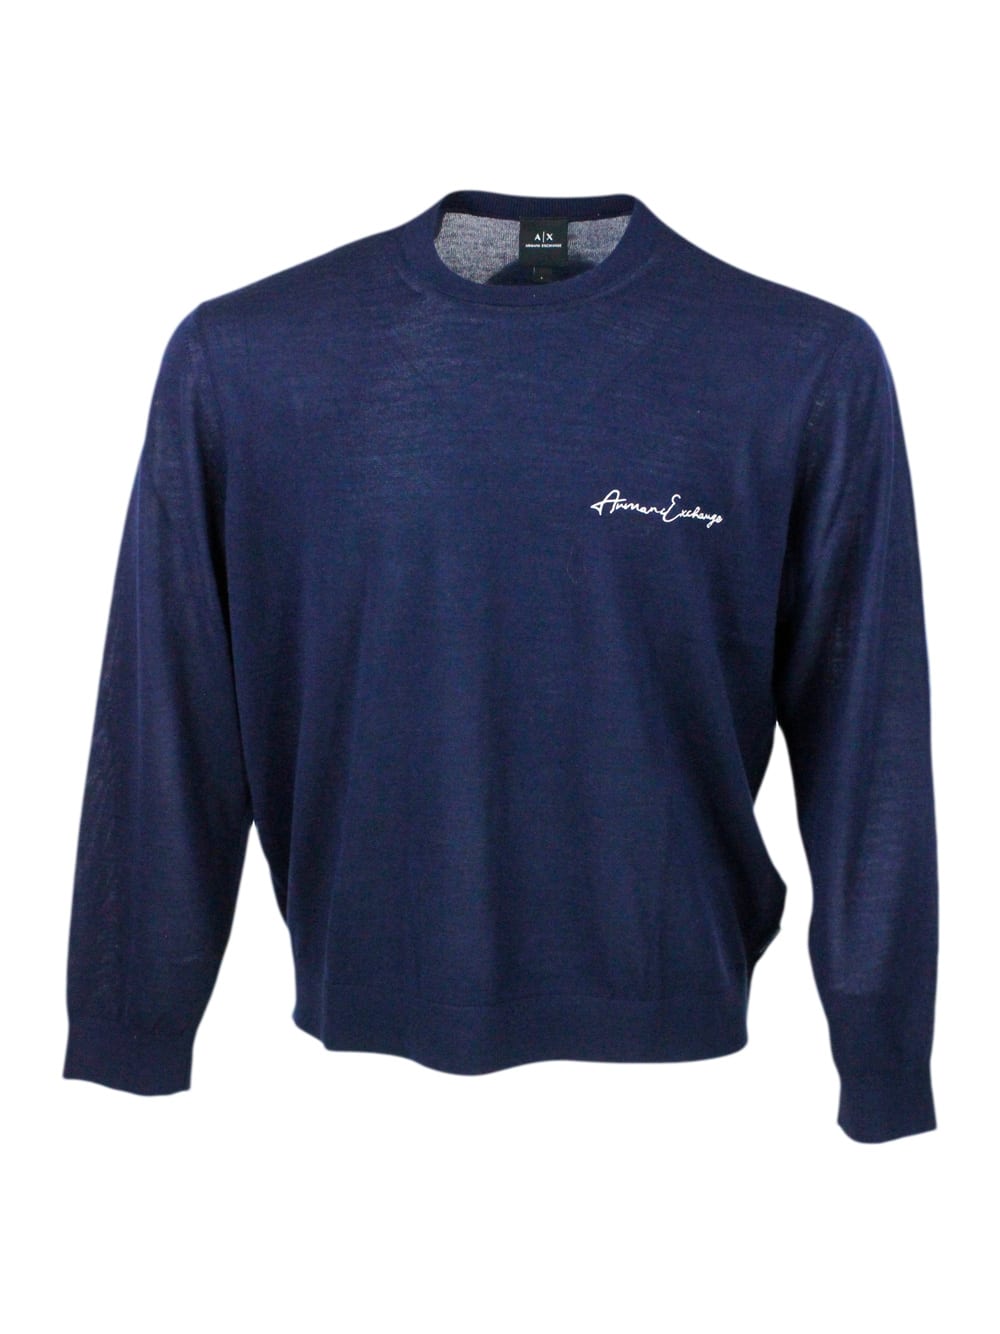 Lightweight Long-sleeved Crew-neck Sweater Made Of Wool Blend With Logo Writing On The Chest